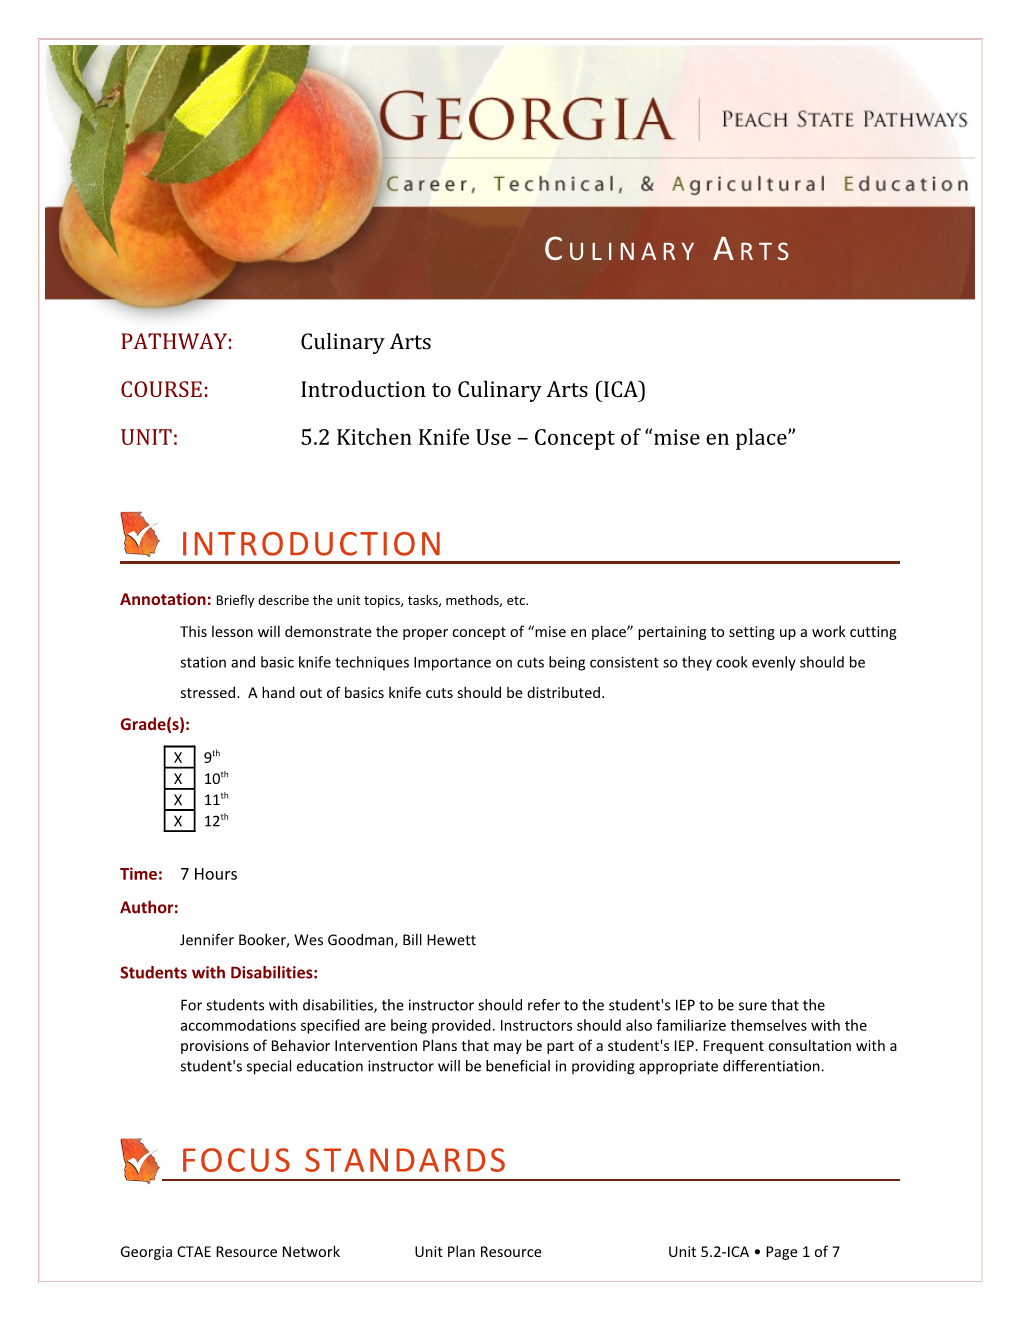 COURSE: Introduction to Culinary Arts (ICA)